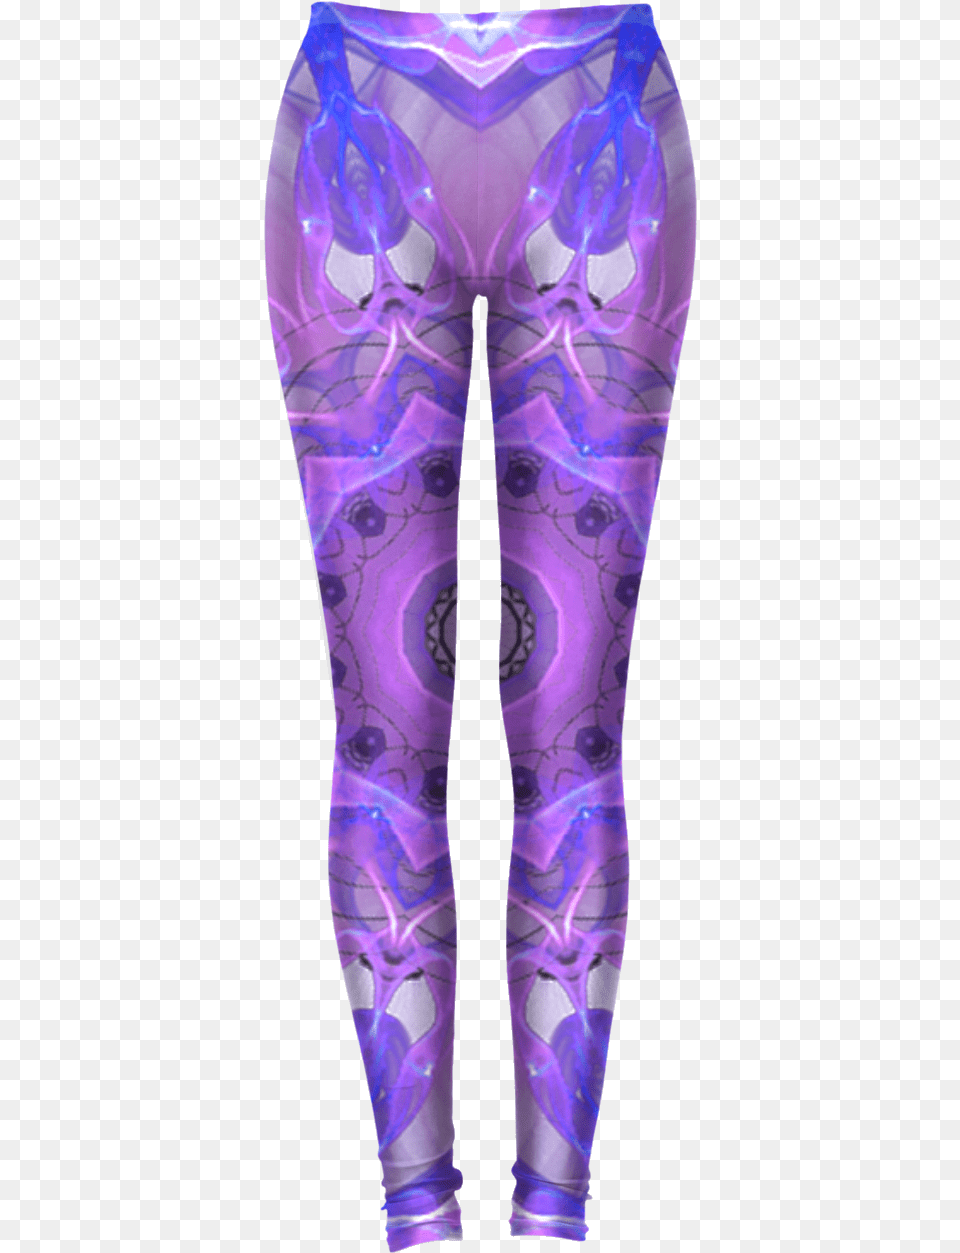 Abstract Plum Ice Crystal Palace Lattice Lace Mandala Leggings, Clothing, Hosiery, Purple, Tights Free Png Download